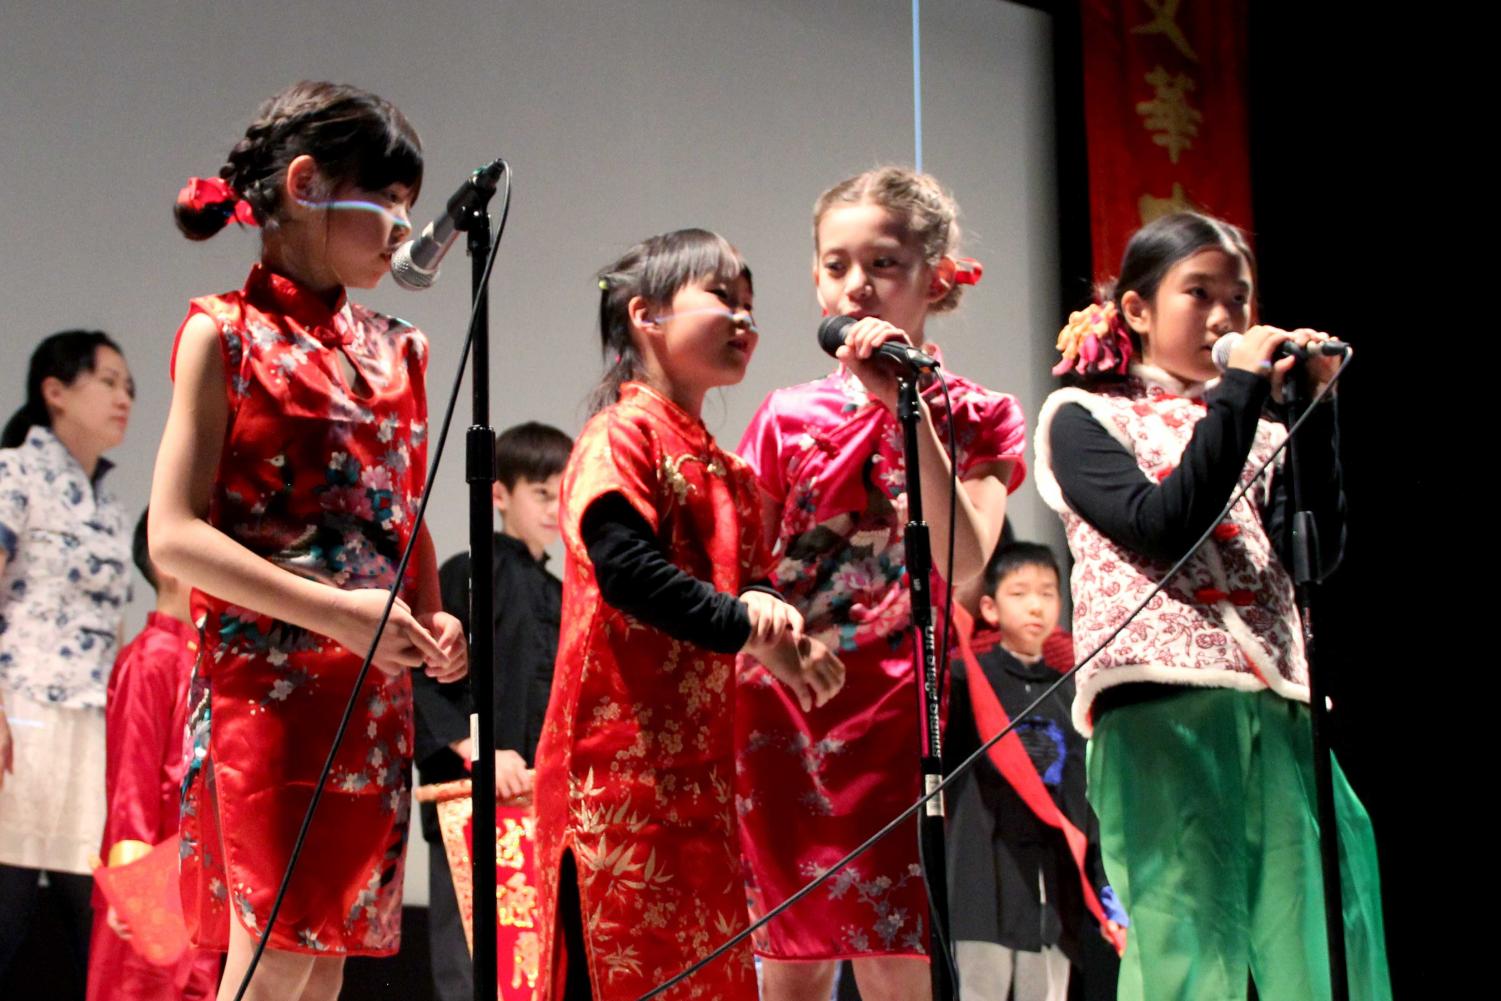 UTEP+Celebrates+the+Year+of+the+Dog+with+annual+Chinese+New+Year+Celebration